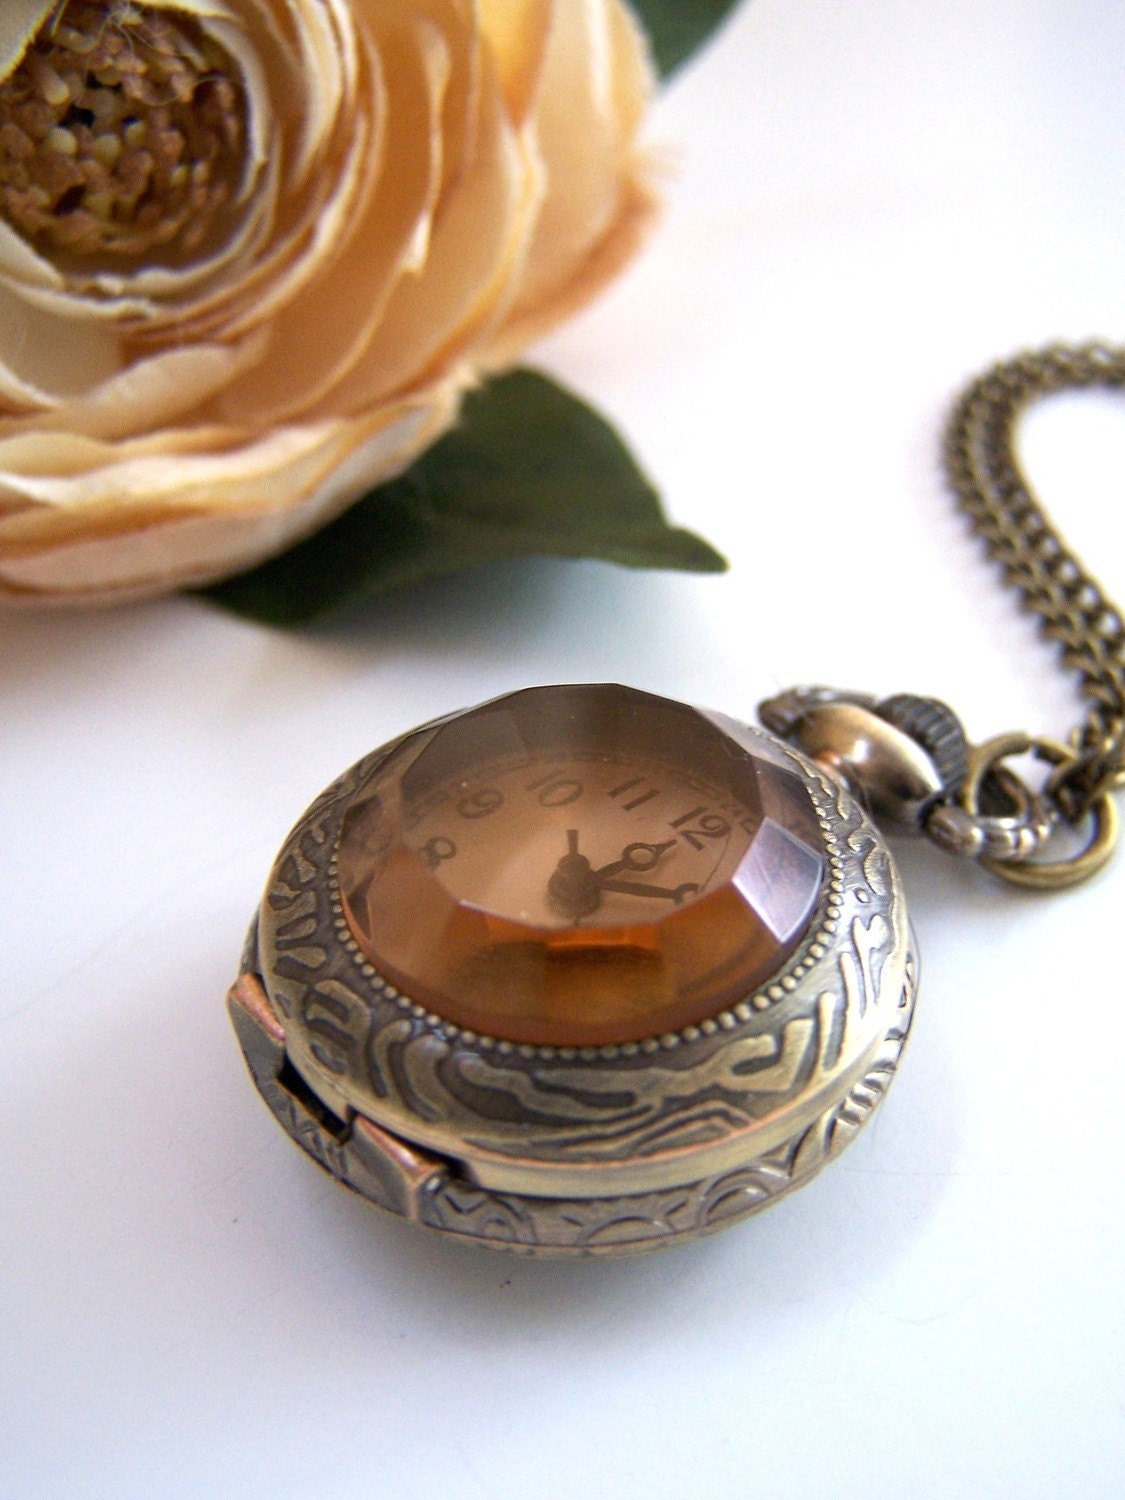 the tea glass pocket watch (necklace).